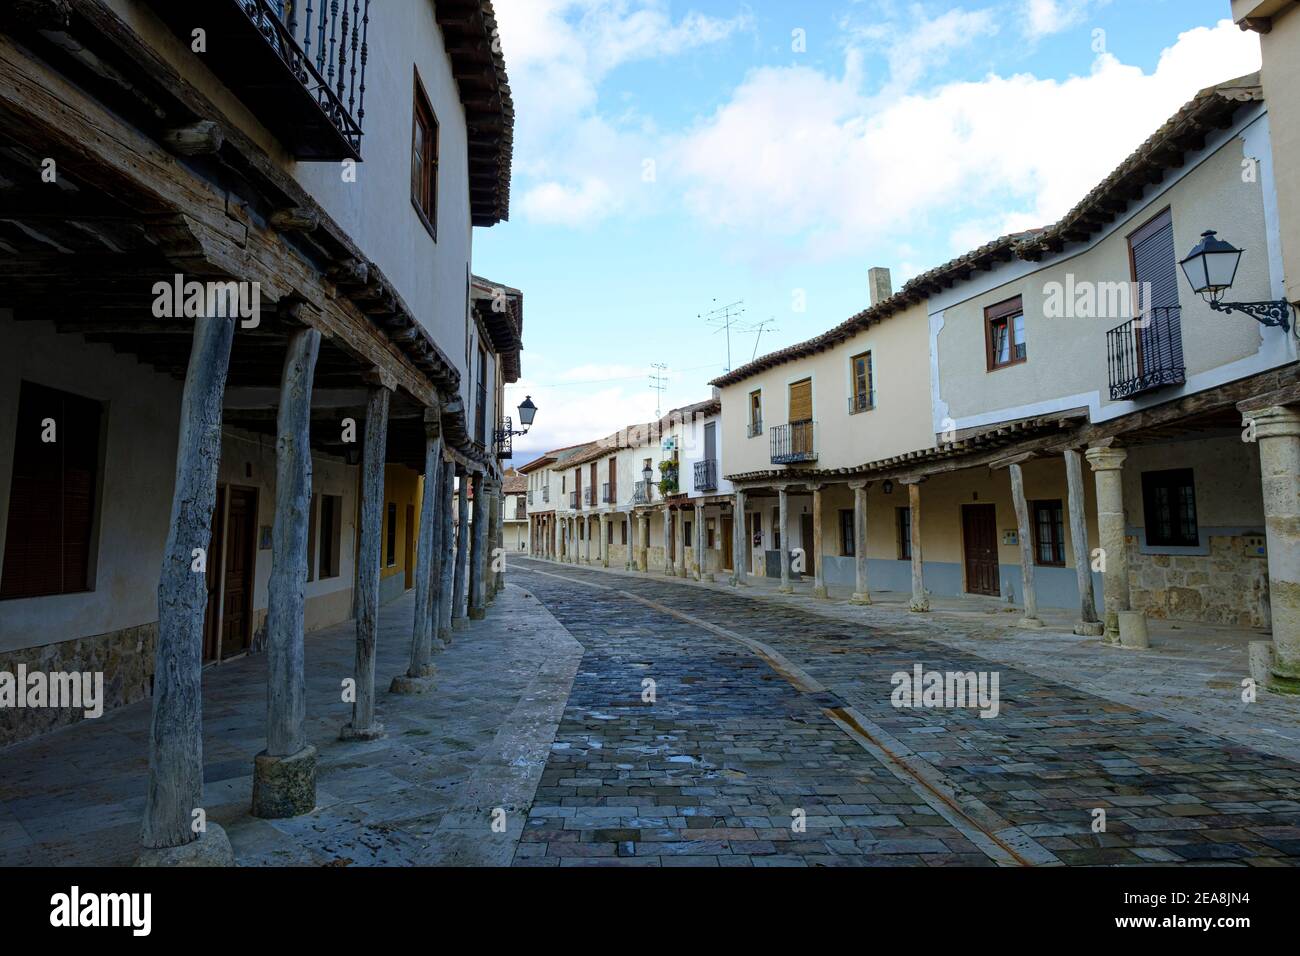 The historic adobe, arcaded streets of the old quarter. Ampudia, Palencia Province, Castille y Leon, Spain Stock Photo